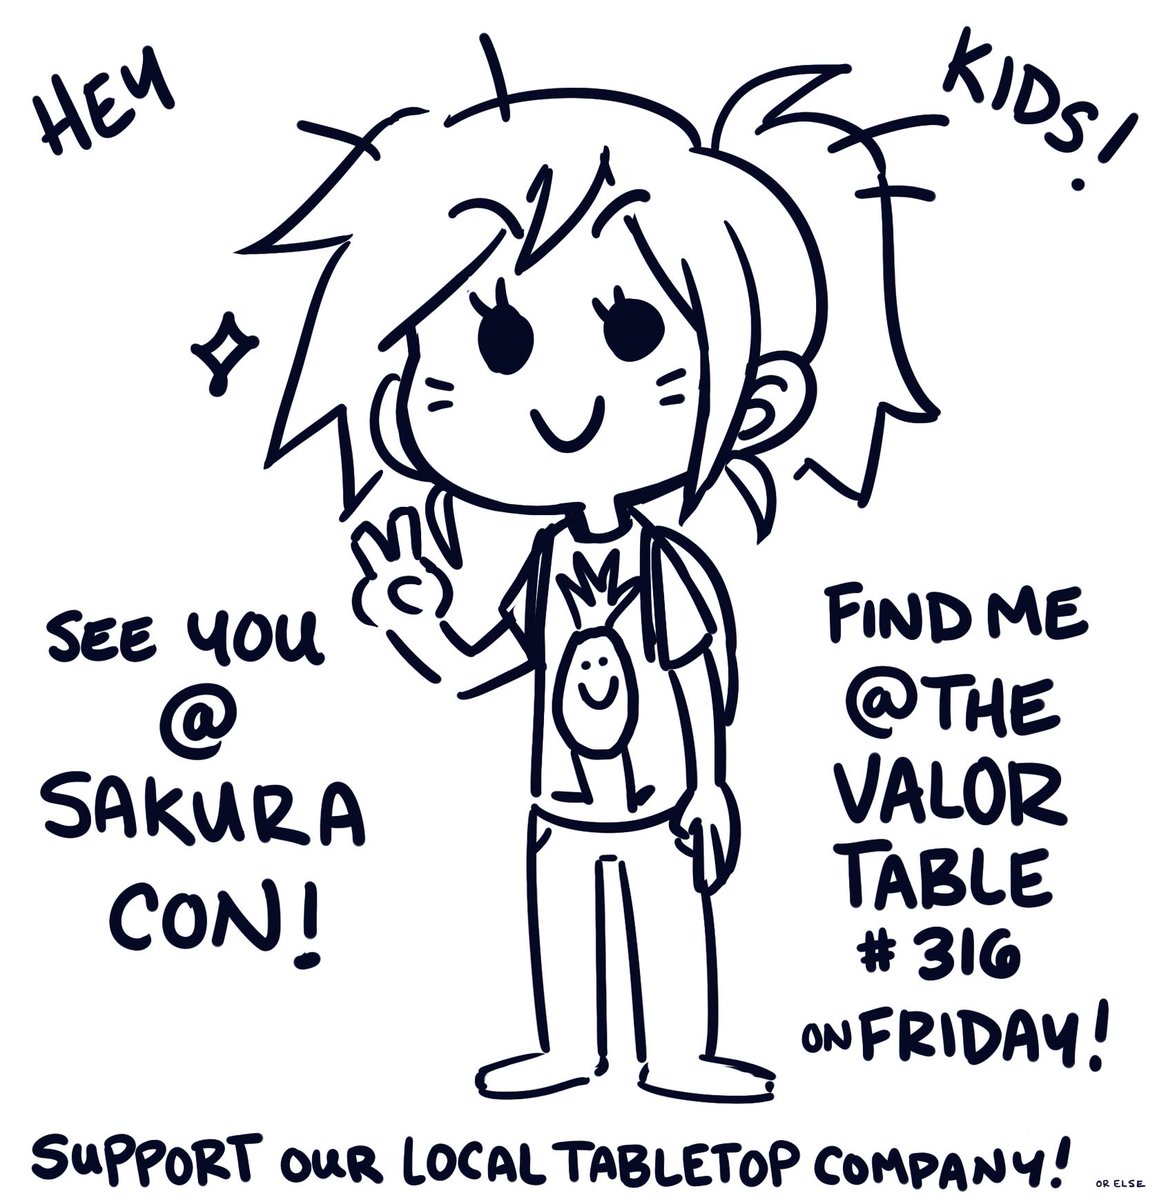 HEY, I'll be at Sakura Con this weekend!  You can find me guaranteed w/coffee and wearing a smiley pineapple tshirt on Friday, I'll be at the Valor table #316 in the exhibitor's hall.  Please come say hi, check out the game I illustrate for, and give it a try in the demo room!!✨ 